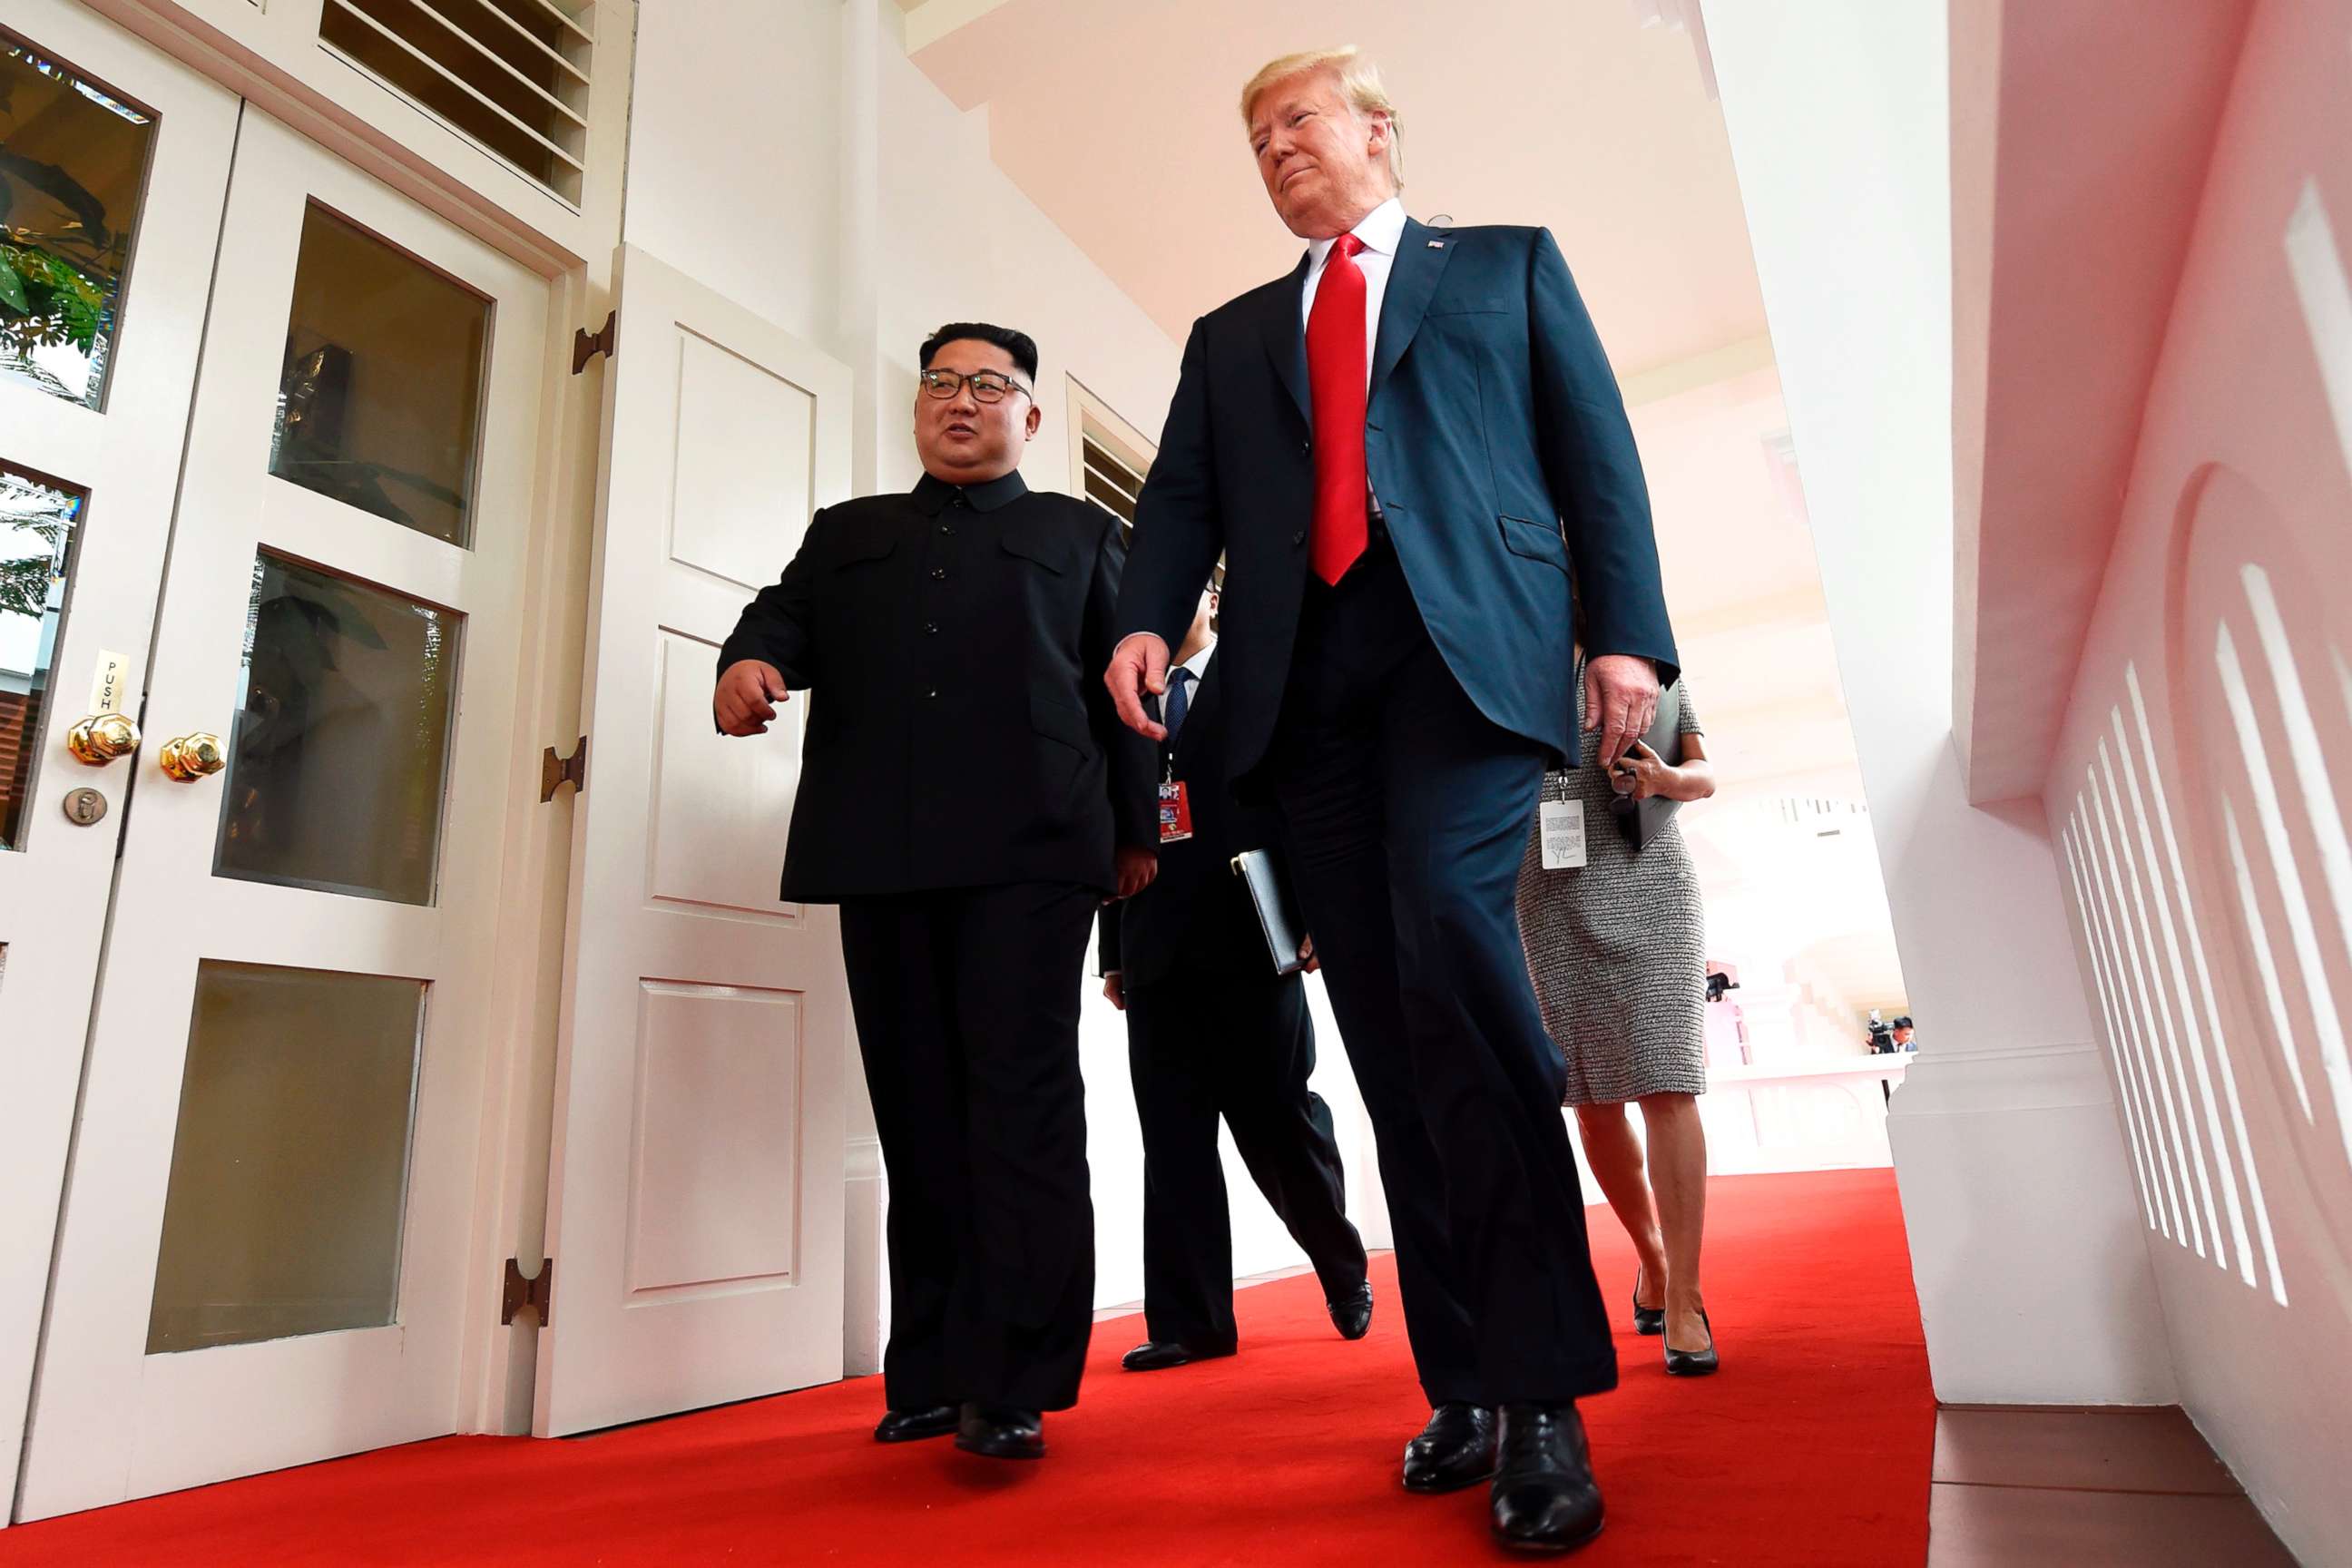 PHOTO: North Korea's leader Kim Jong Un walks with President Donald Trump at the start of their summit, at the Capella Hotel on Sentosa island, in Singapore, on June 12, 2018.